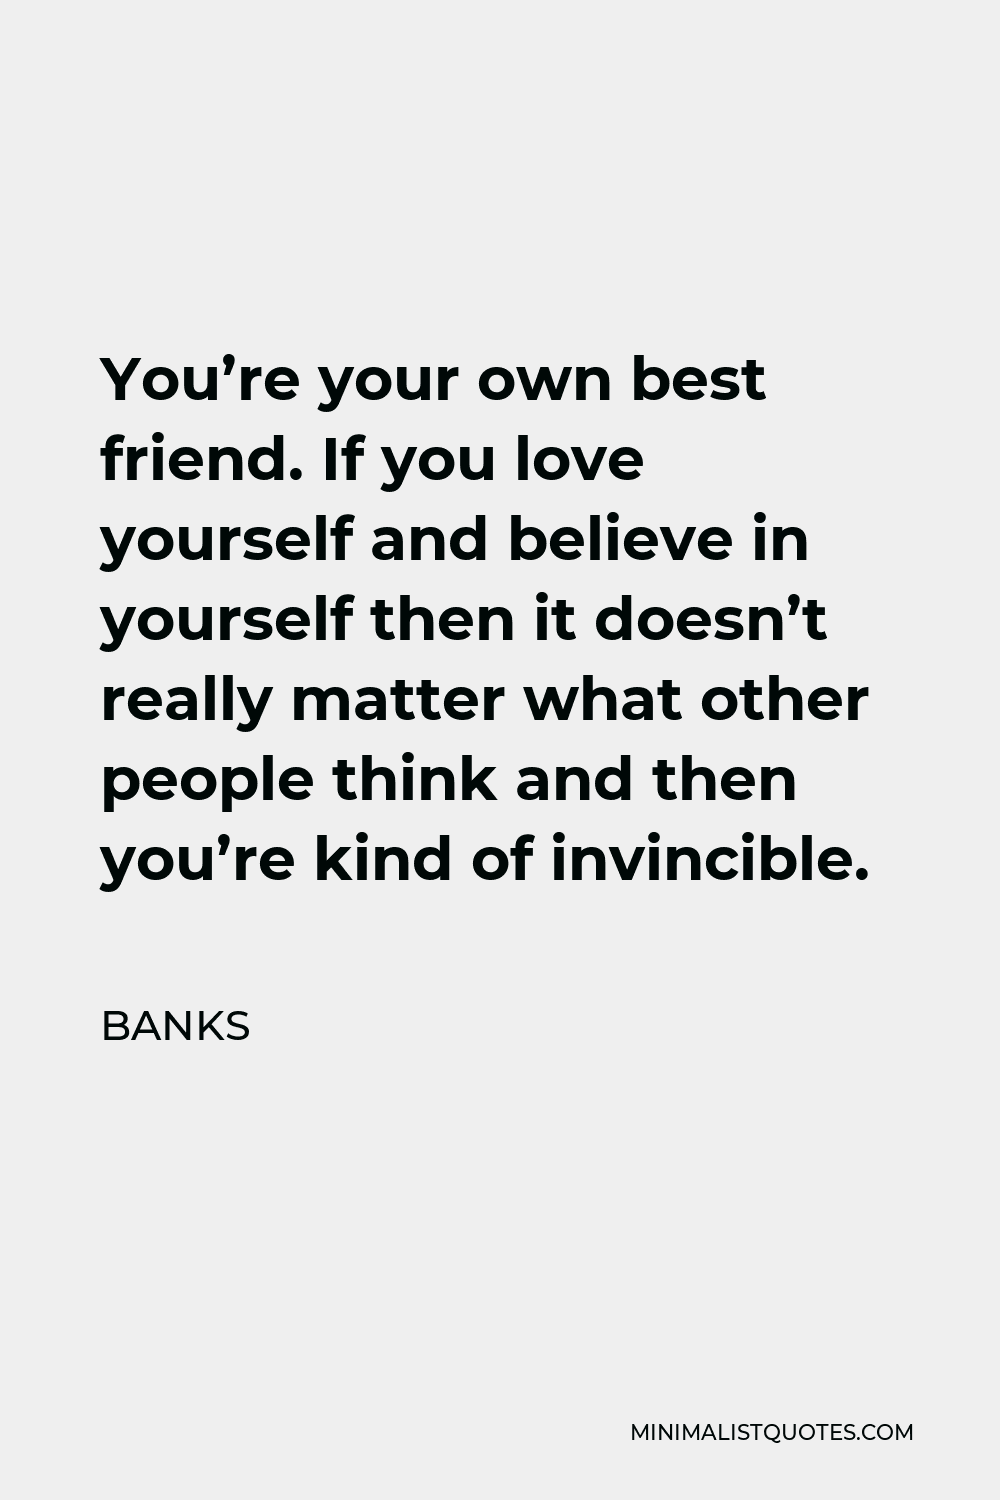 BANKS Quote - You’re your own best friend. If you love yourself and believe in yourself then it doesn’t really matter what other people think and then you’re kind of invincible.